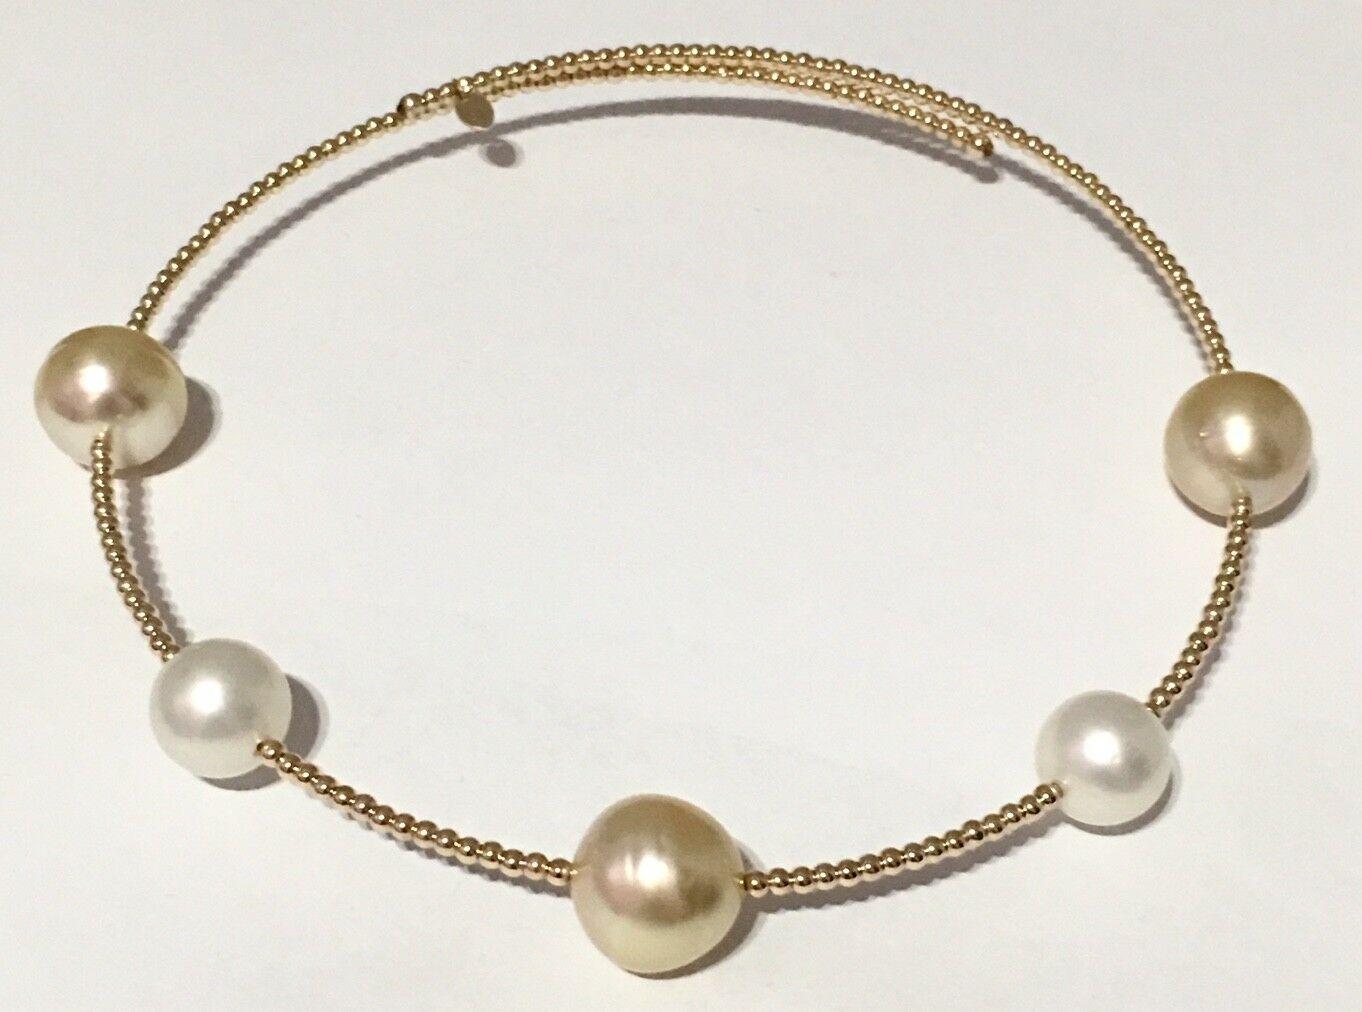 Golden South Sea Pearl Necklace 14k Gold Italy Italy Certified 4